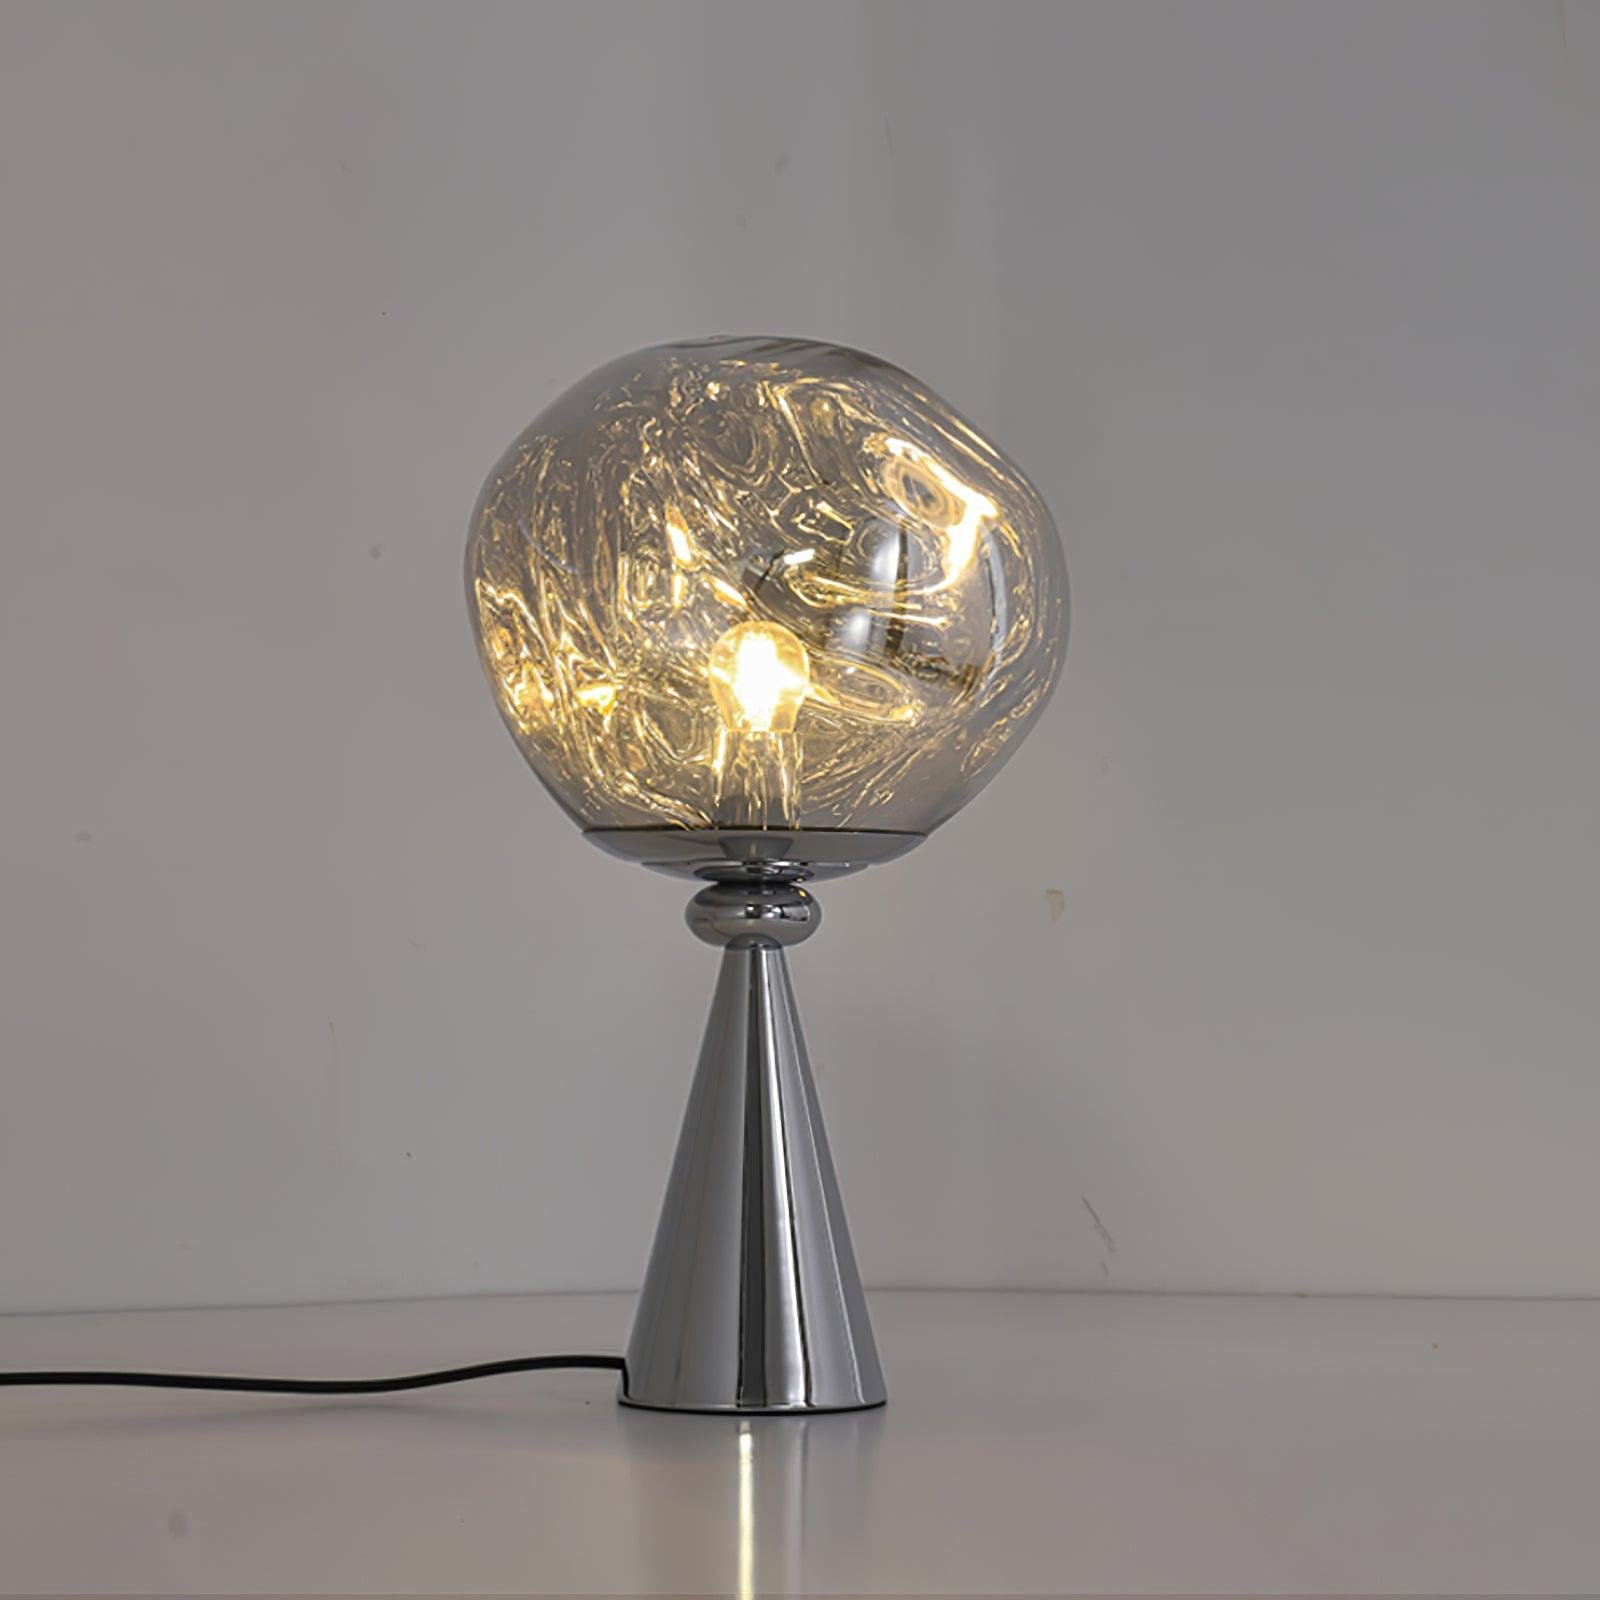 Melt Cone Table Lamp with Chrome Finish, Diameter 11 inches x Height 17.7 inches (28cm x 45cm), Includes UK Plug